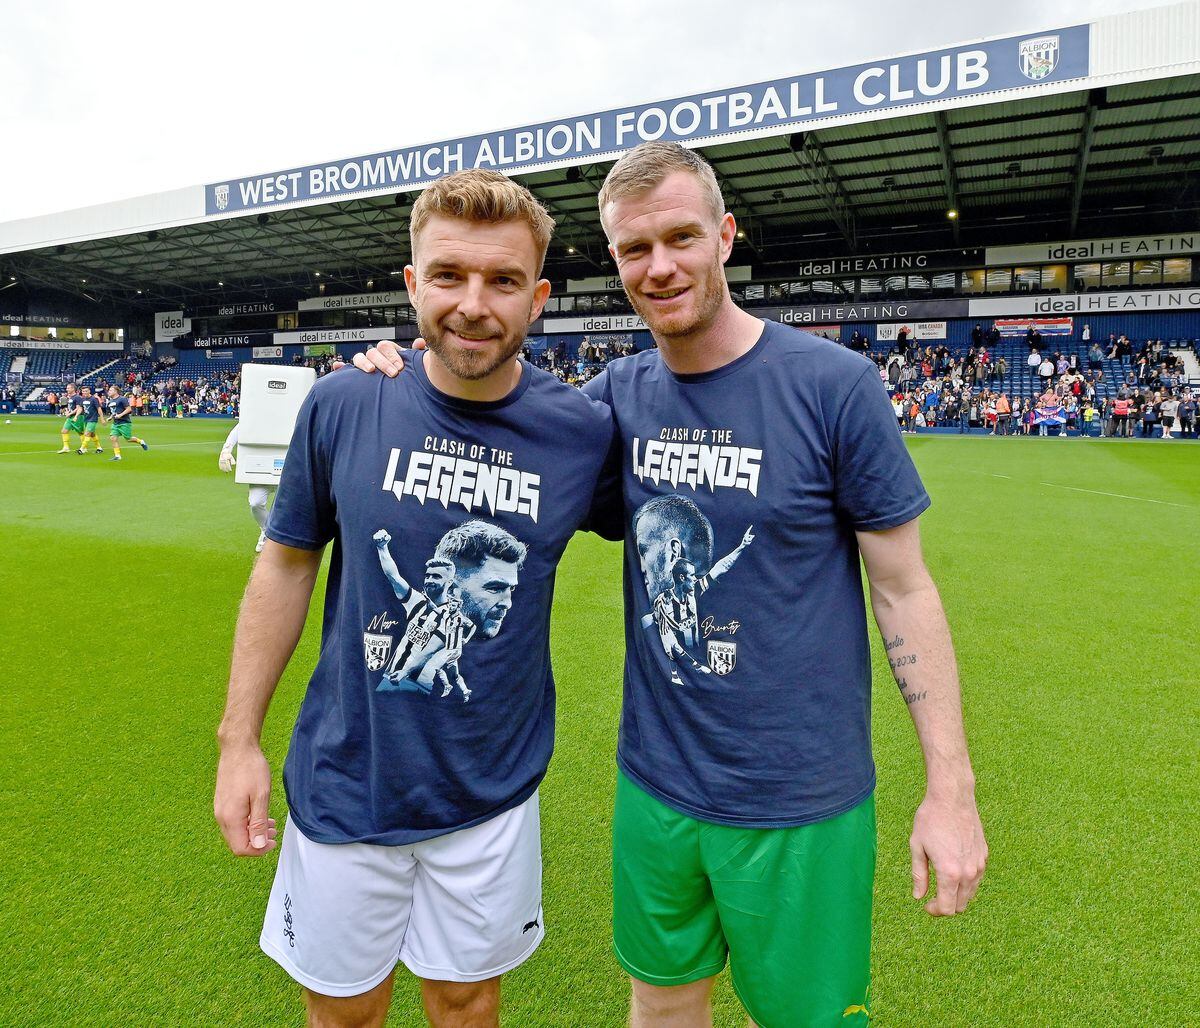 The two legends Chris Brunt and James Morrison before kick off